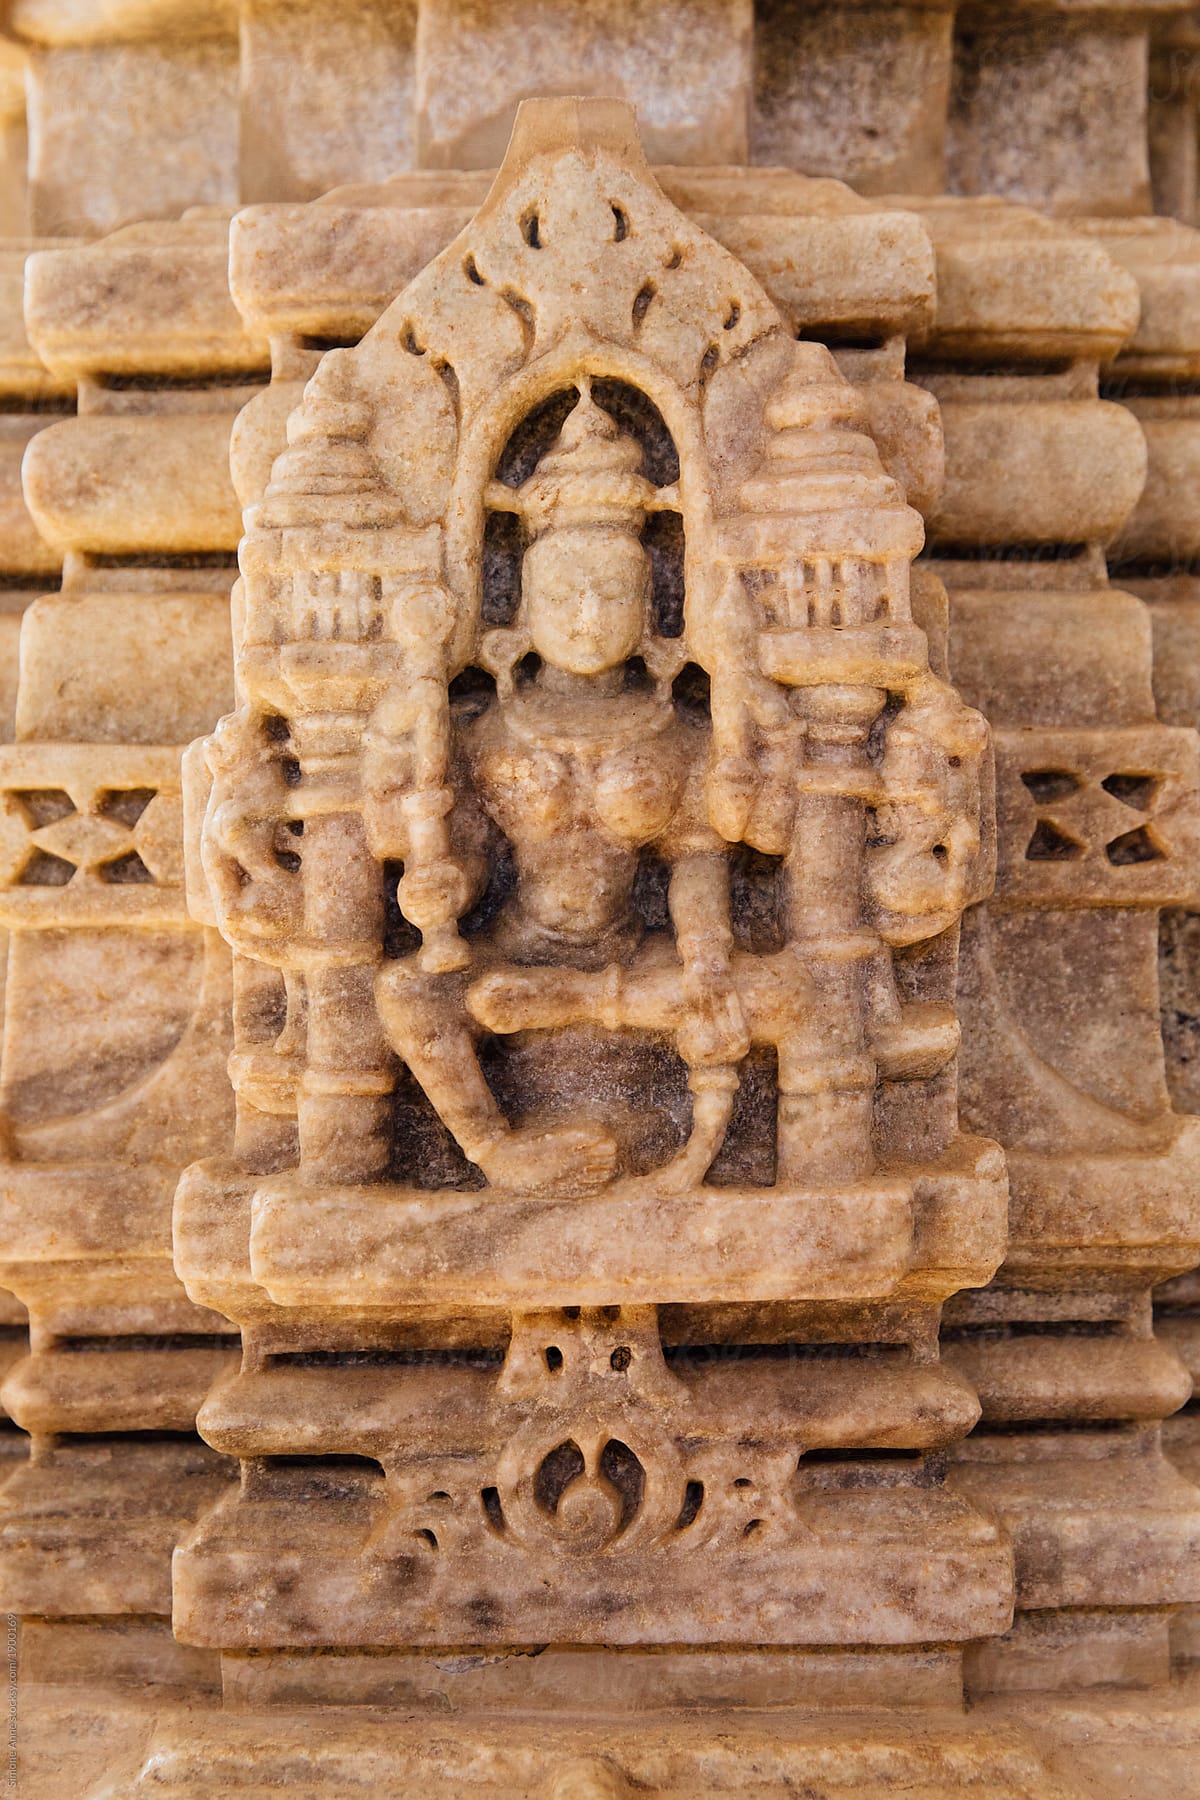 Intricate Jain temple designed and carved out of stone